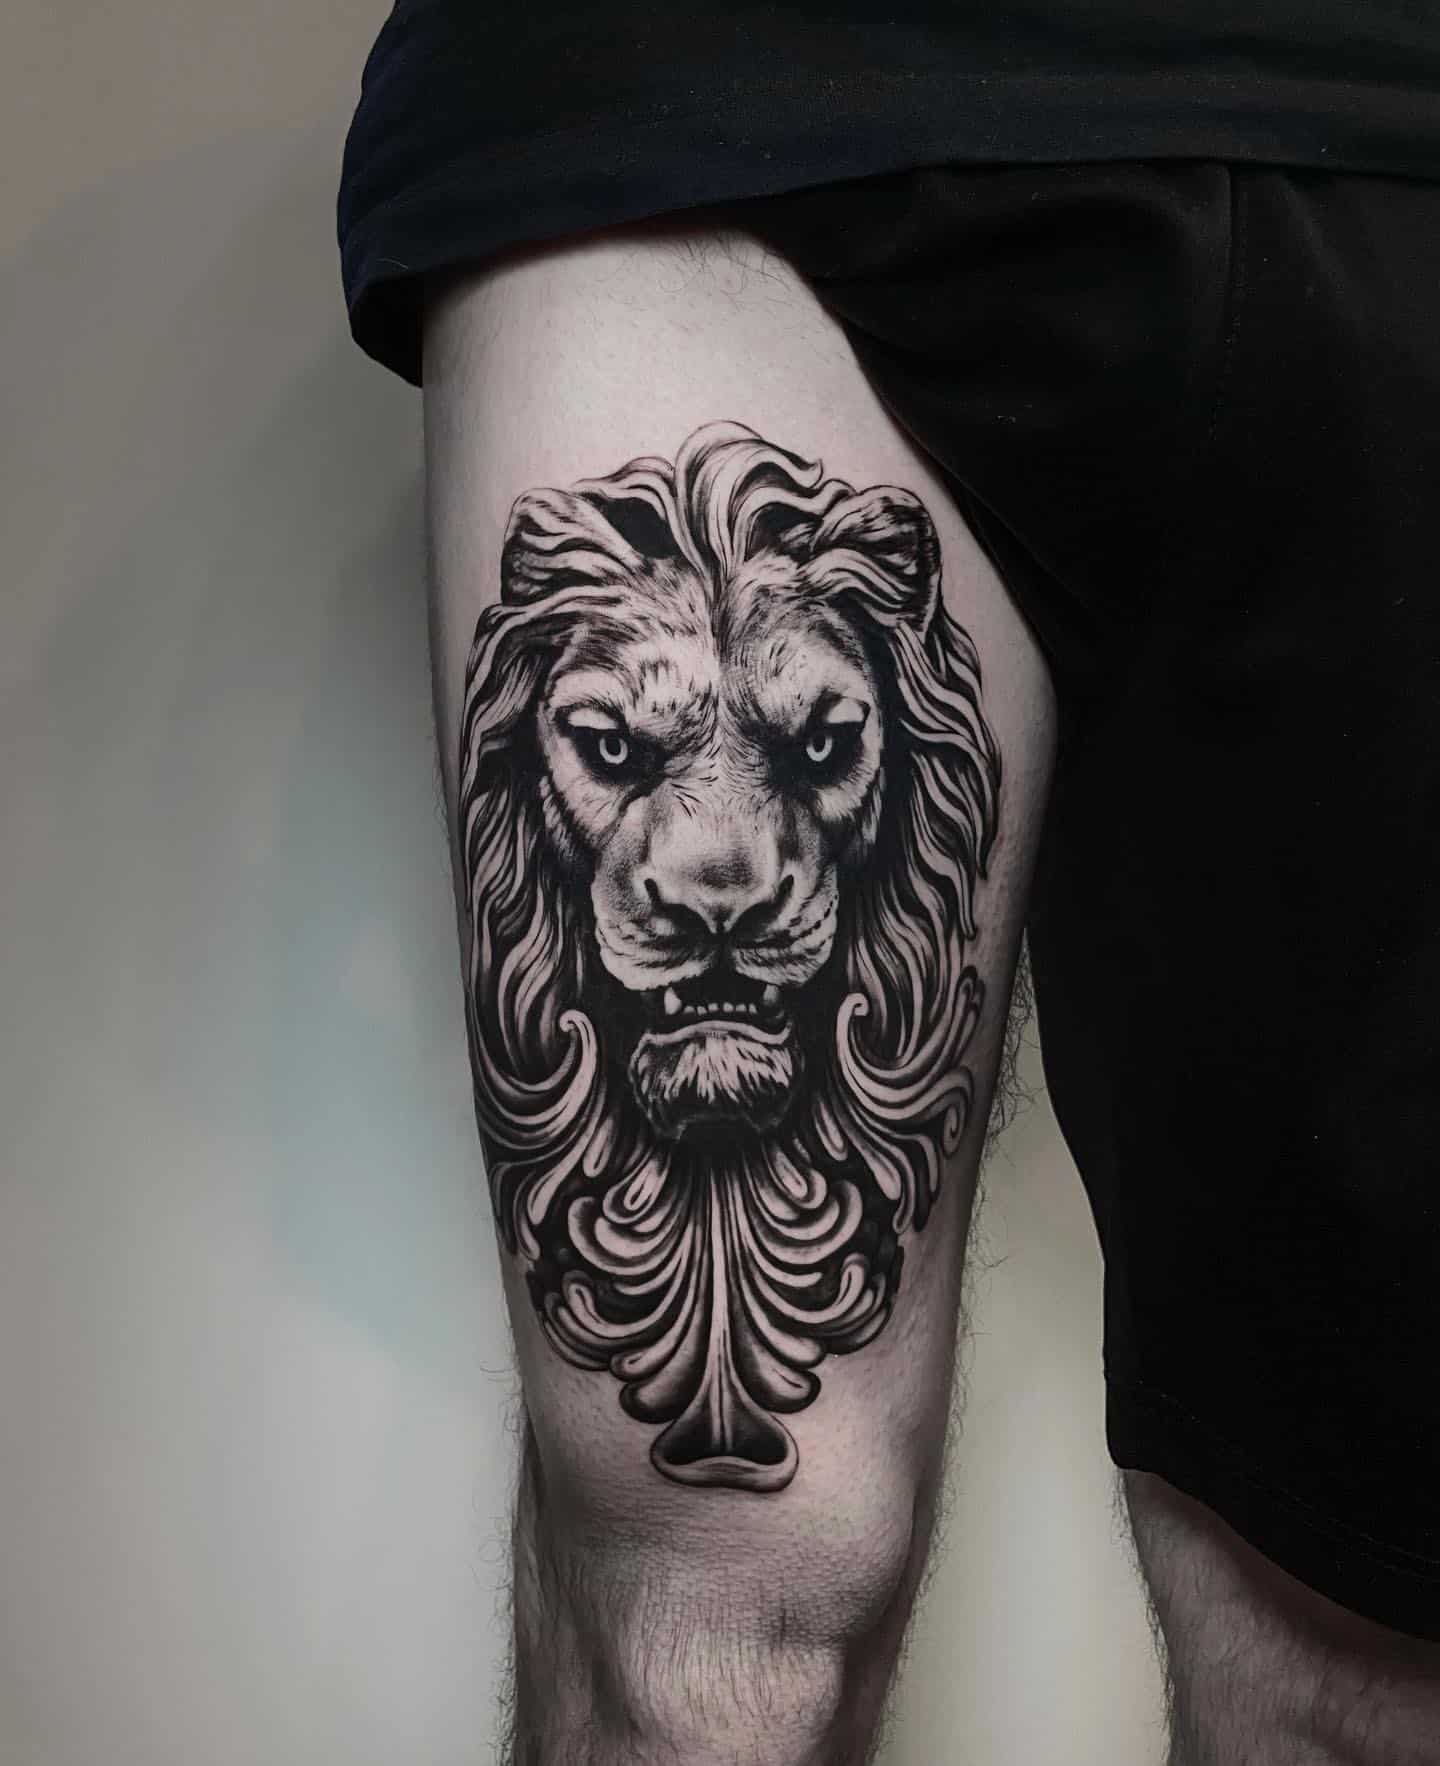  70 Lion Tattoos Meanings Designs and Ideas Powerful Lion Tattoos H   neartattoos